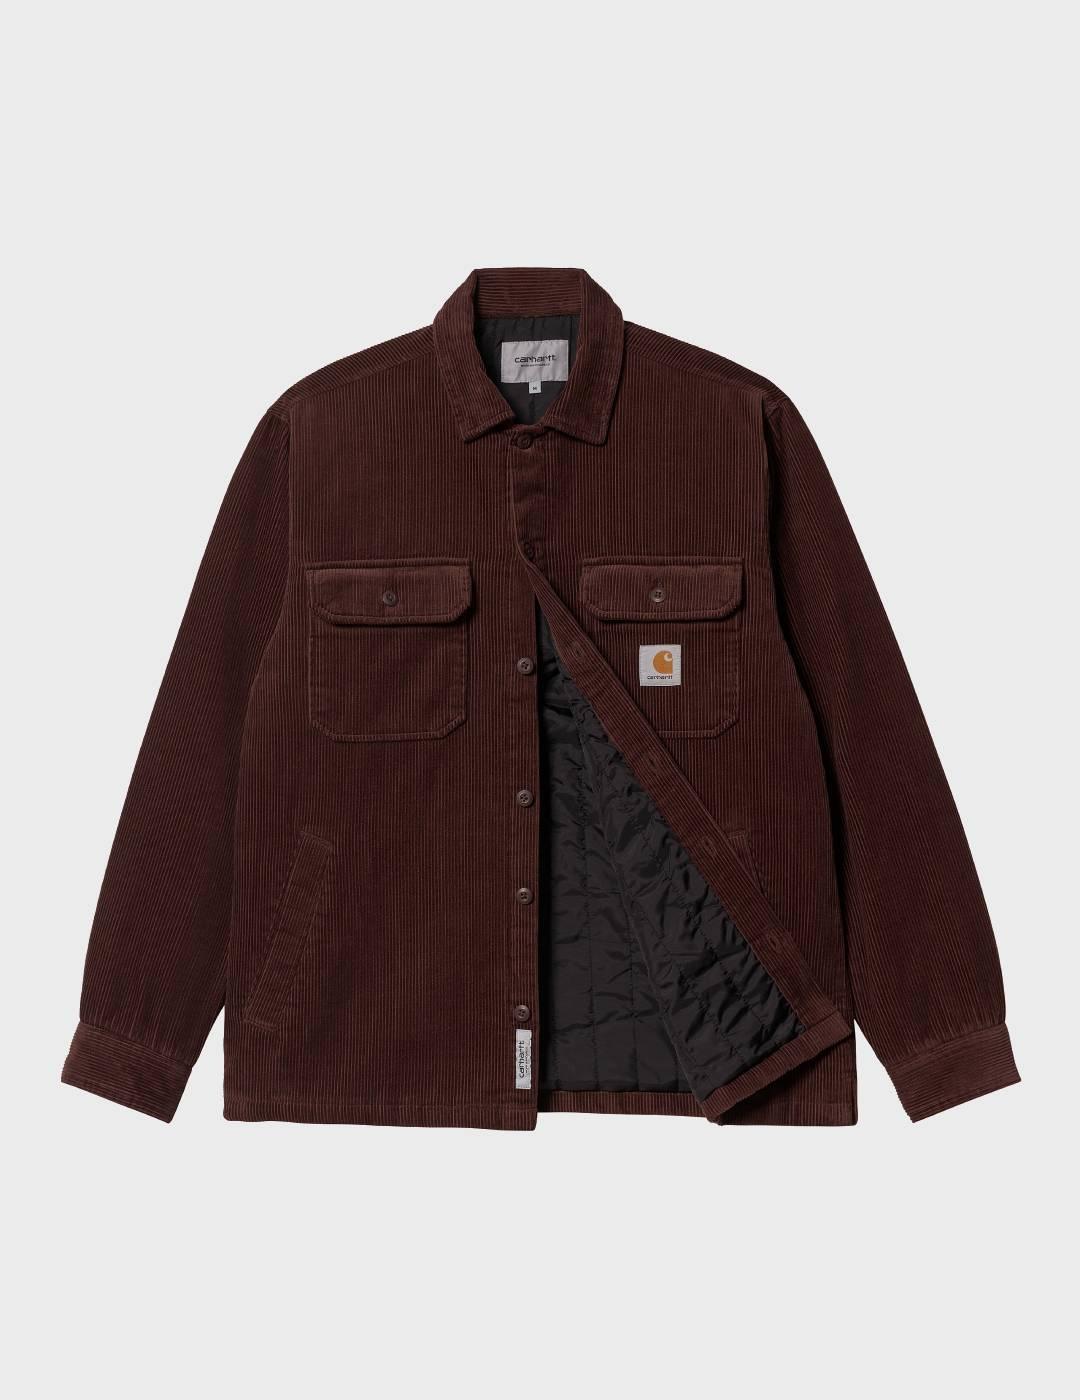 Camisa Carhartt Withsome